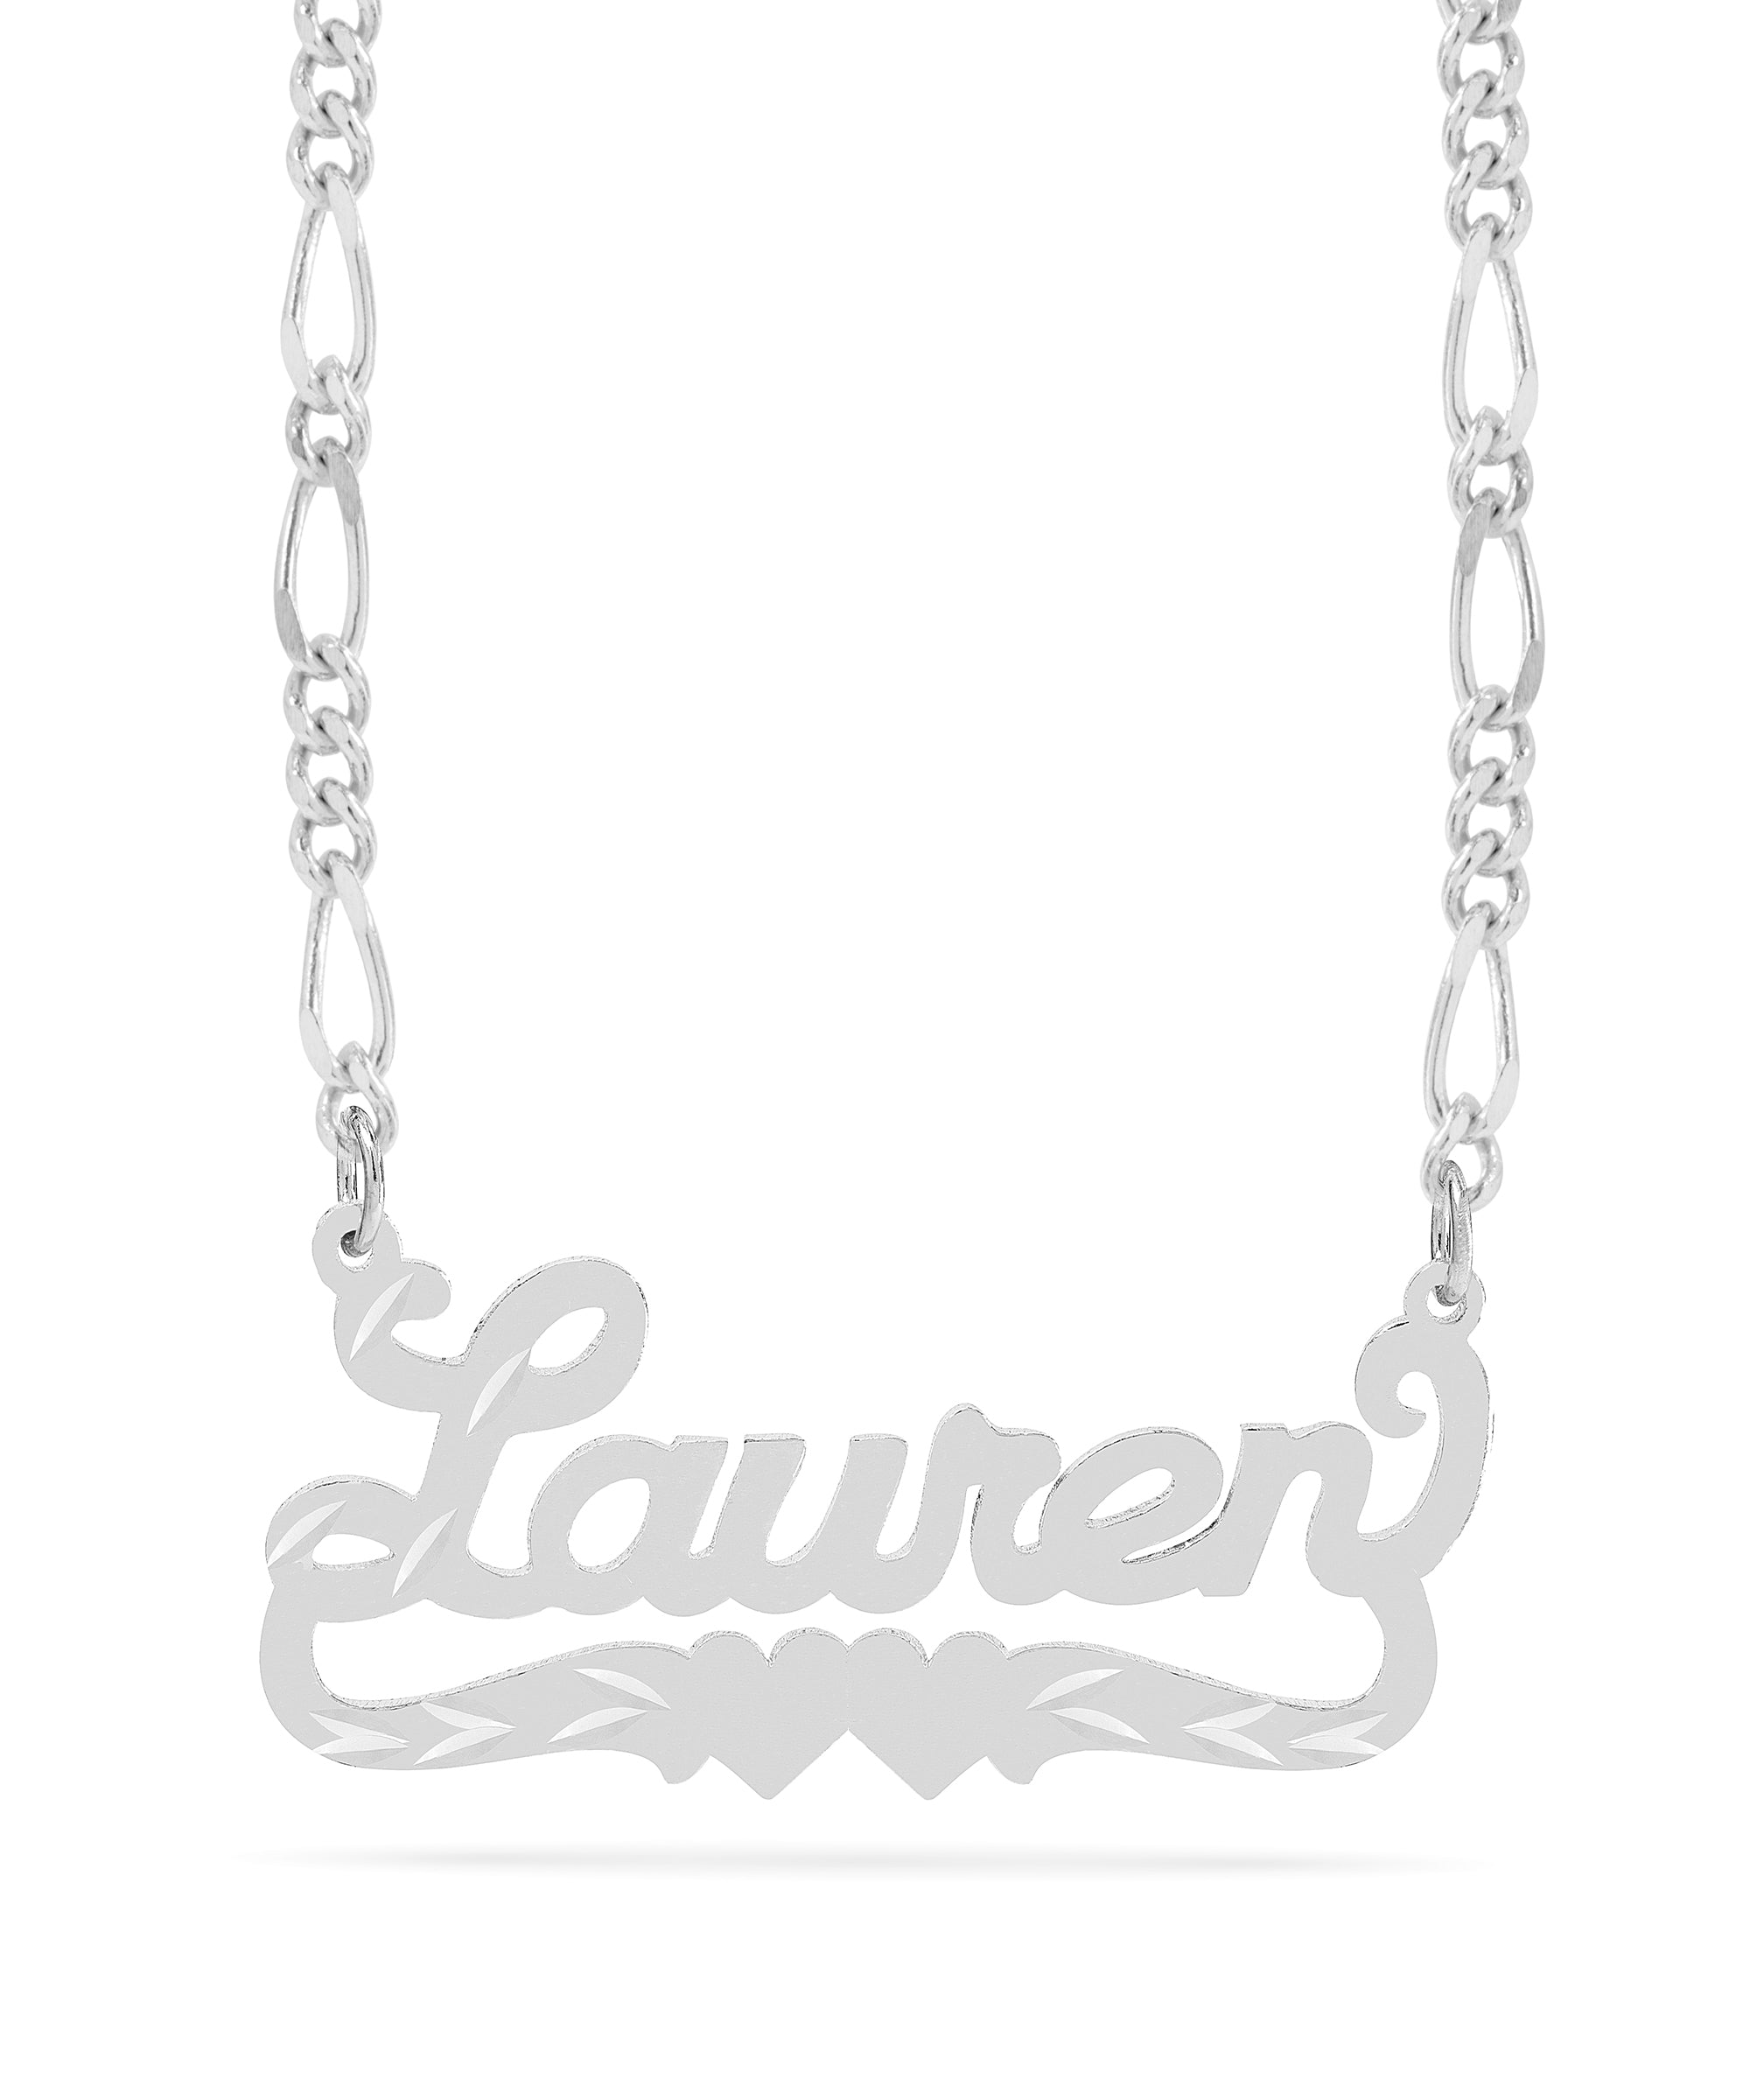 Personalized Name necklace with  Diamond Cut and Satin Finish "Lauren"